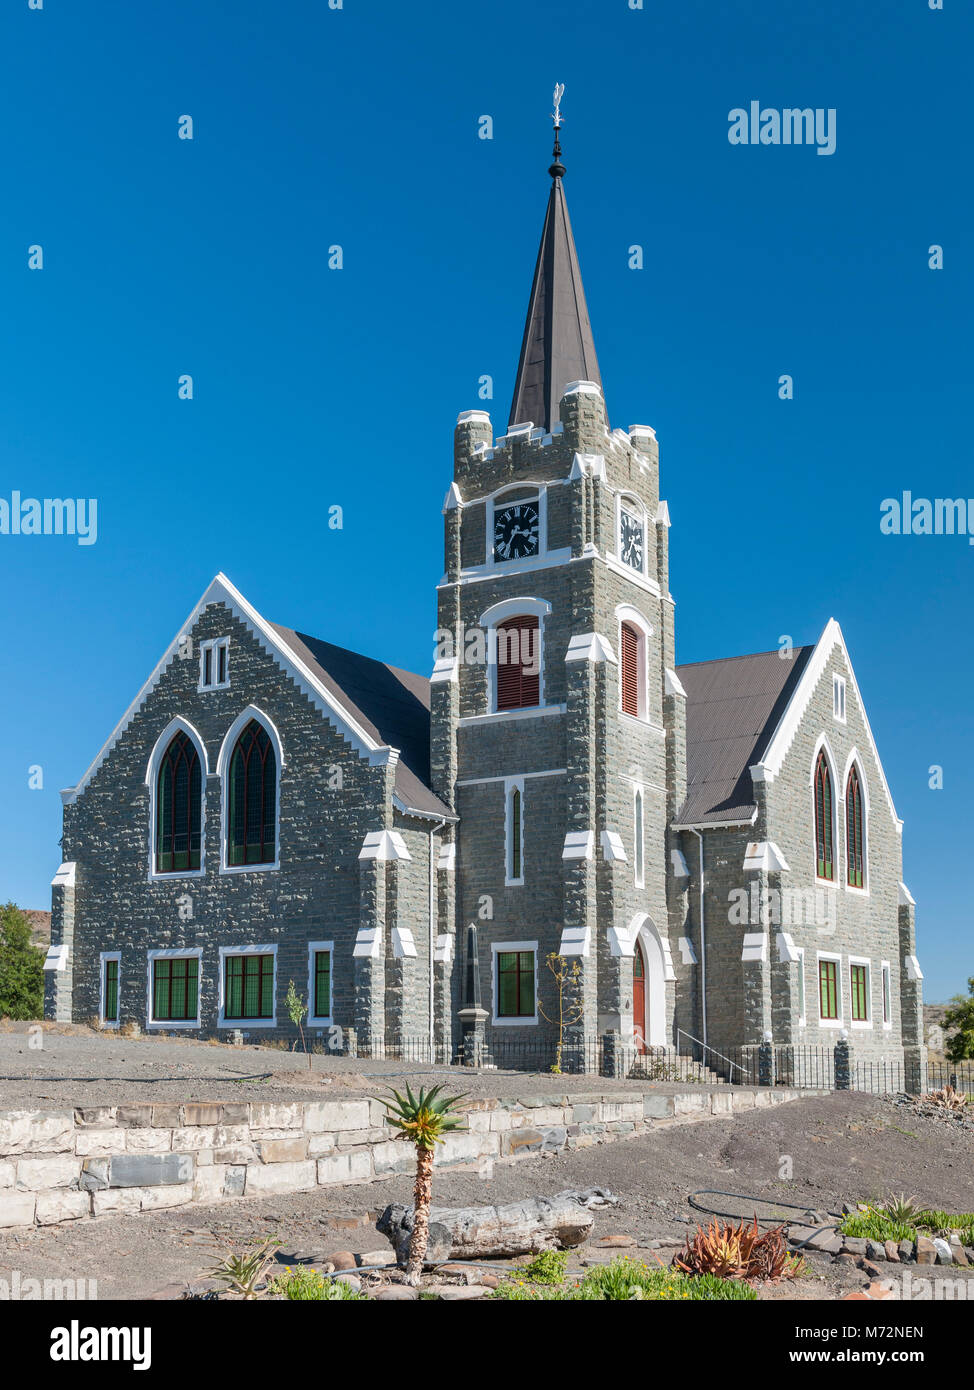 The Dutch Reformed church (NG kerk) in the town of Merweville in the Karoo region of South Africa. Stock Photo